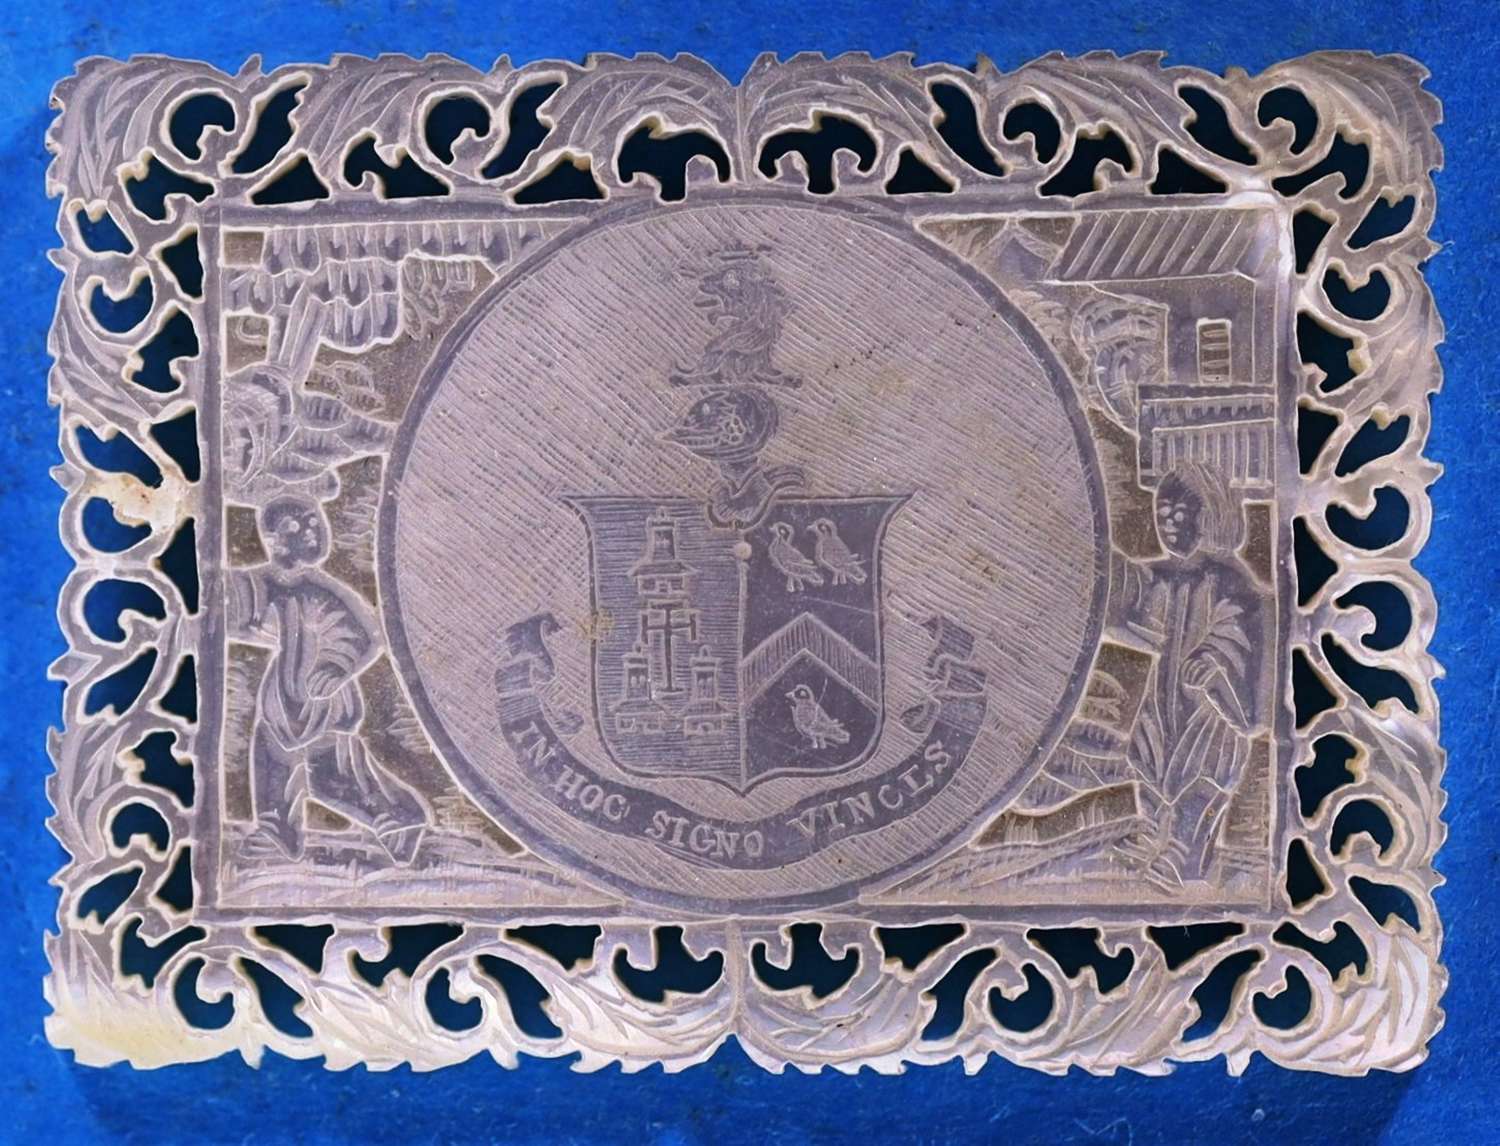 Superb deep-carved fretted armorial!